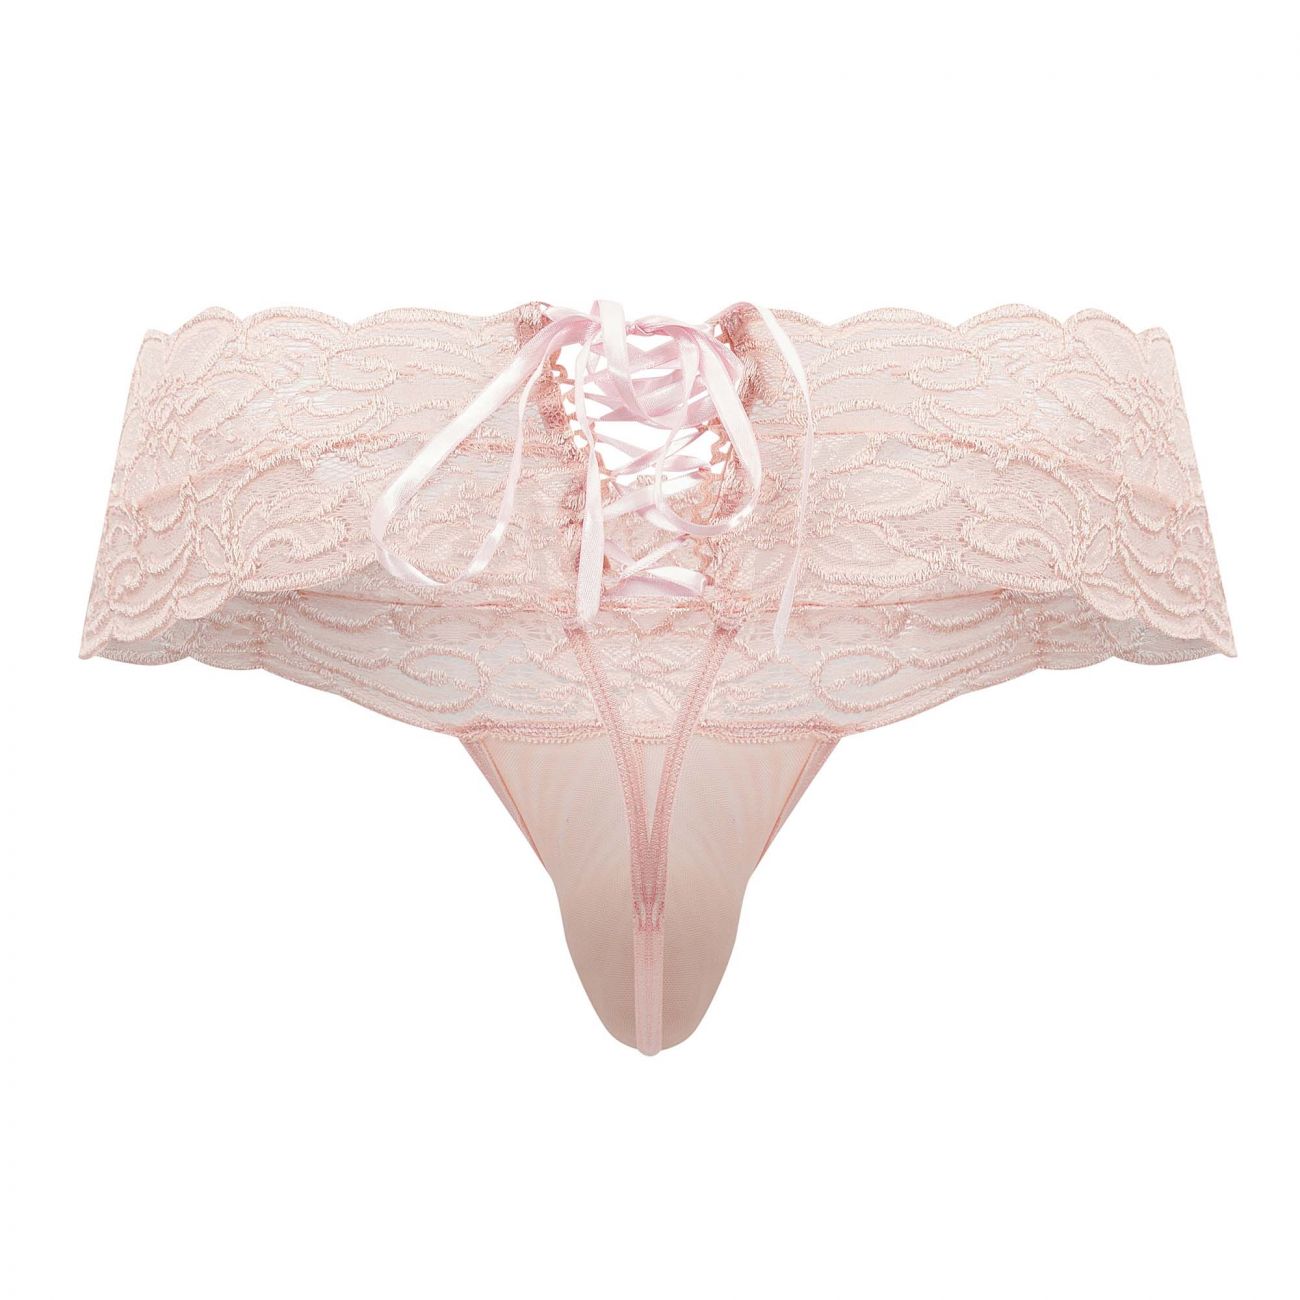 CandyMan 99595 Floral Lace Thongs Rose